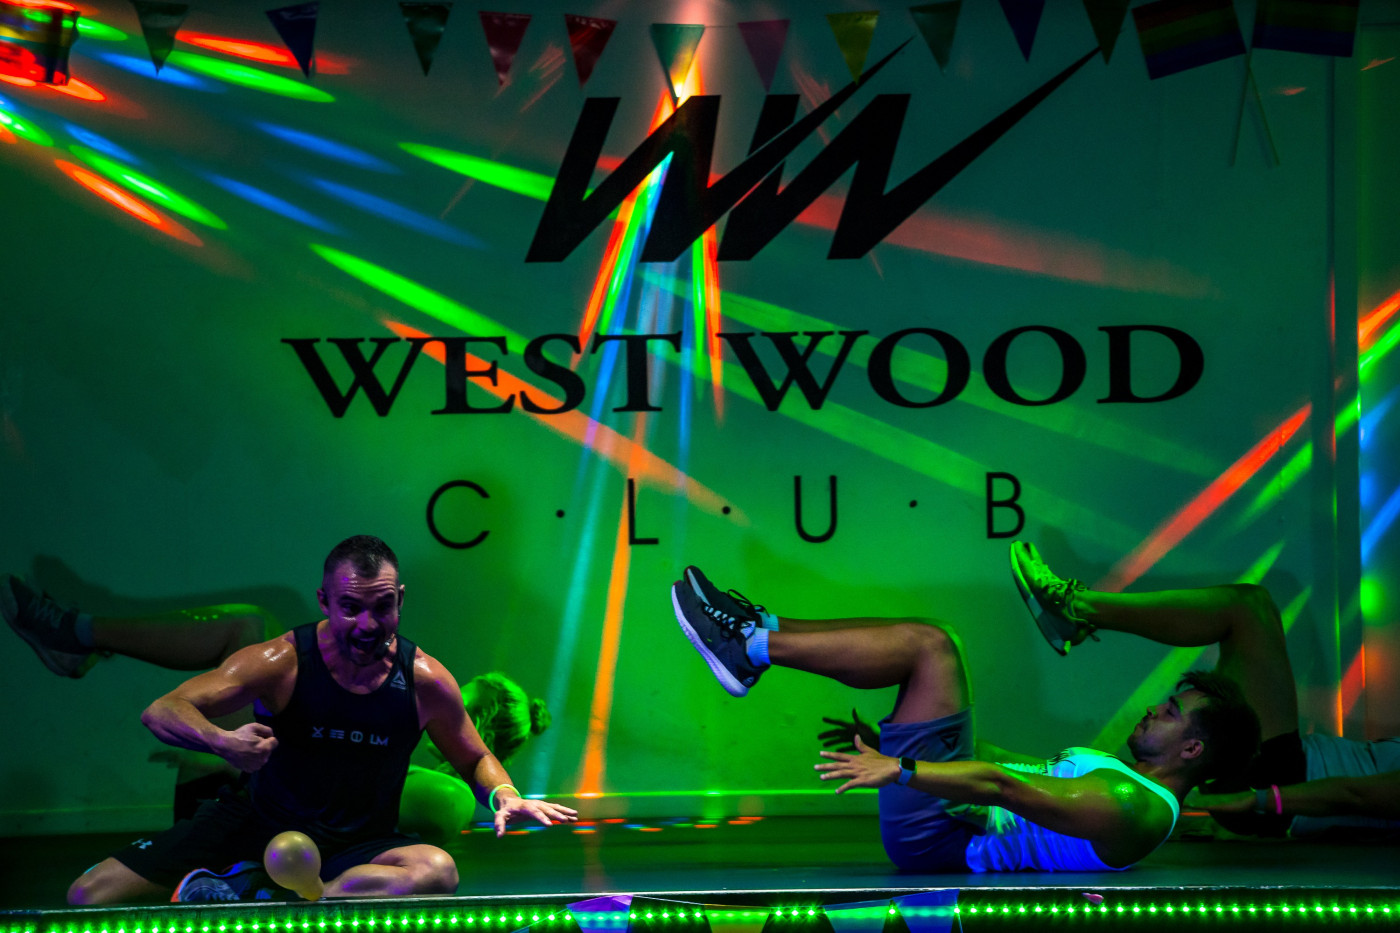 What is Les Mills? Les Mills Classes at West Wood Club, Dublin, Ireland